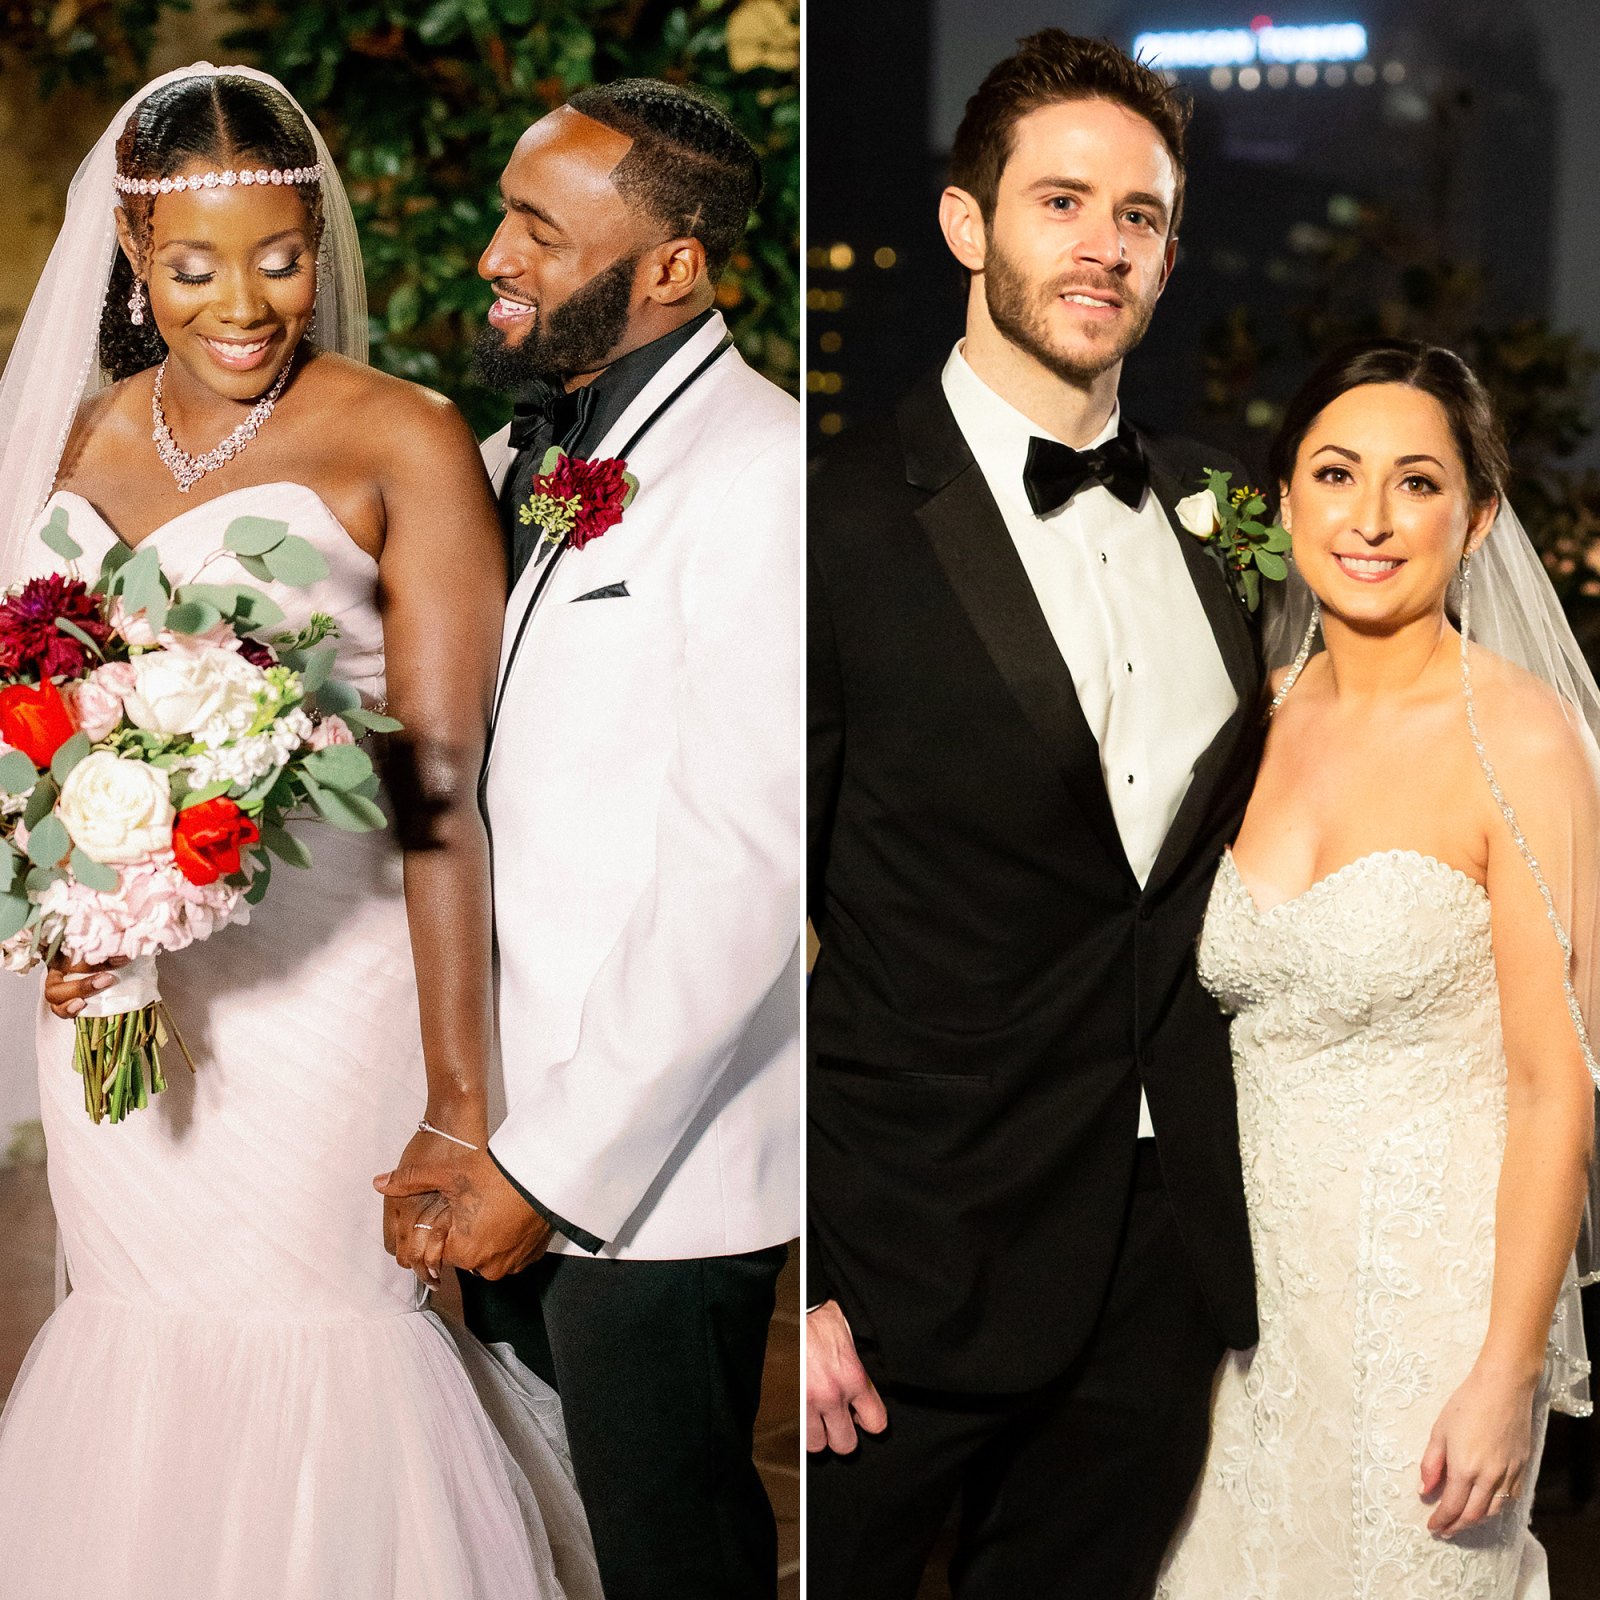 'Married at First Sight' Season 11 Cast Meet the Couples